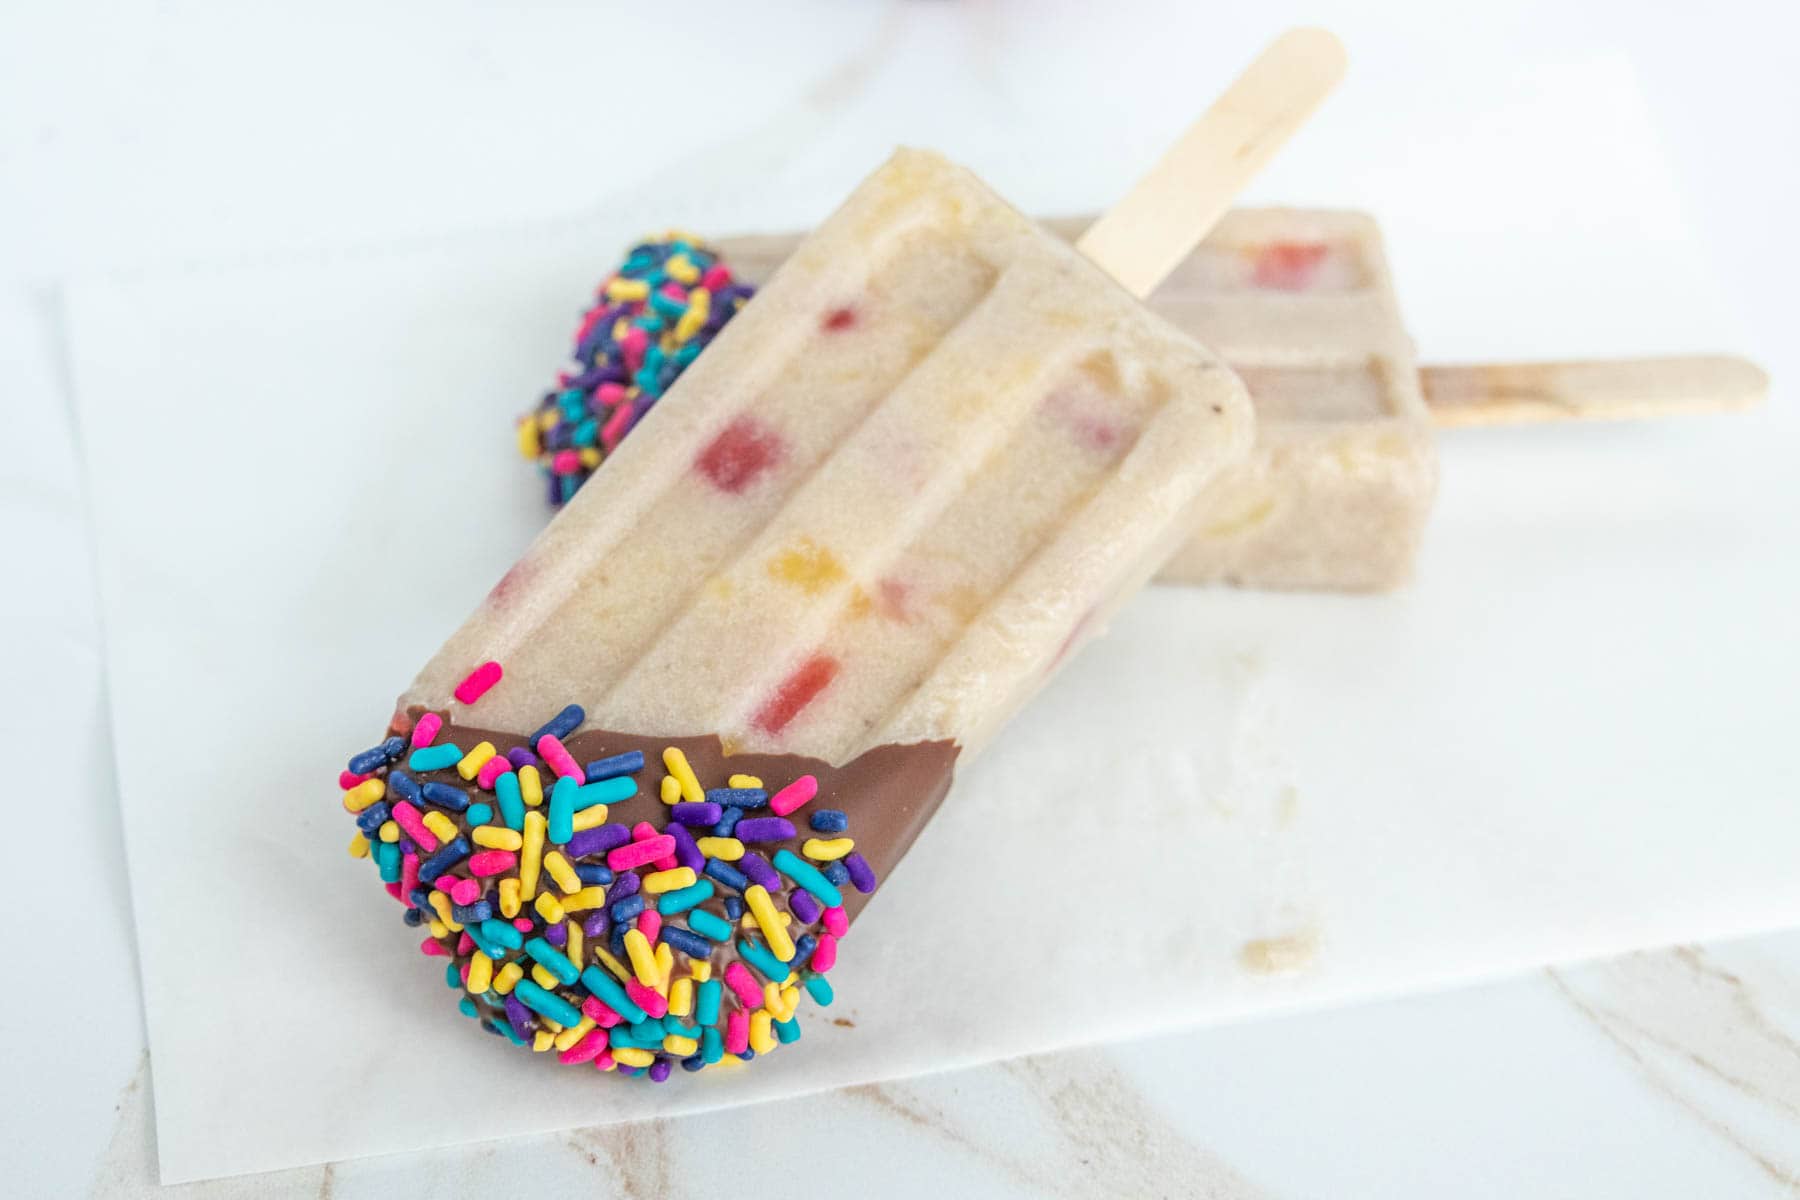 Two popsicles with pieces of fruit, one dipped in chocolate and colorful sprinkles, placed on a white surface.